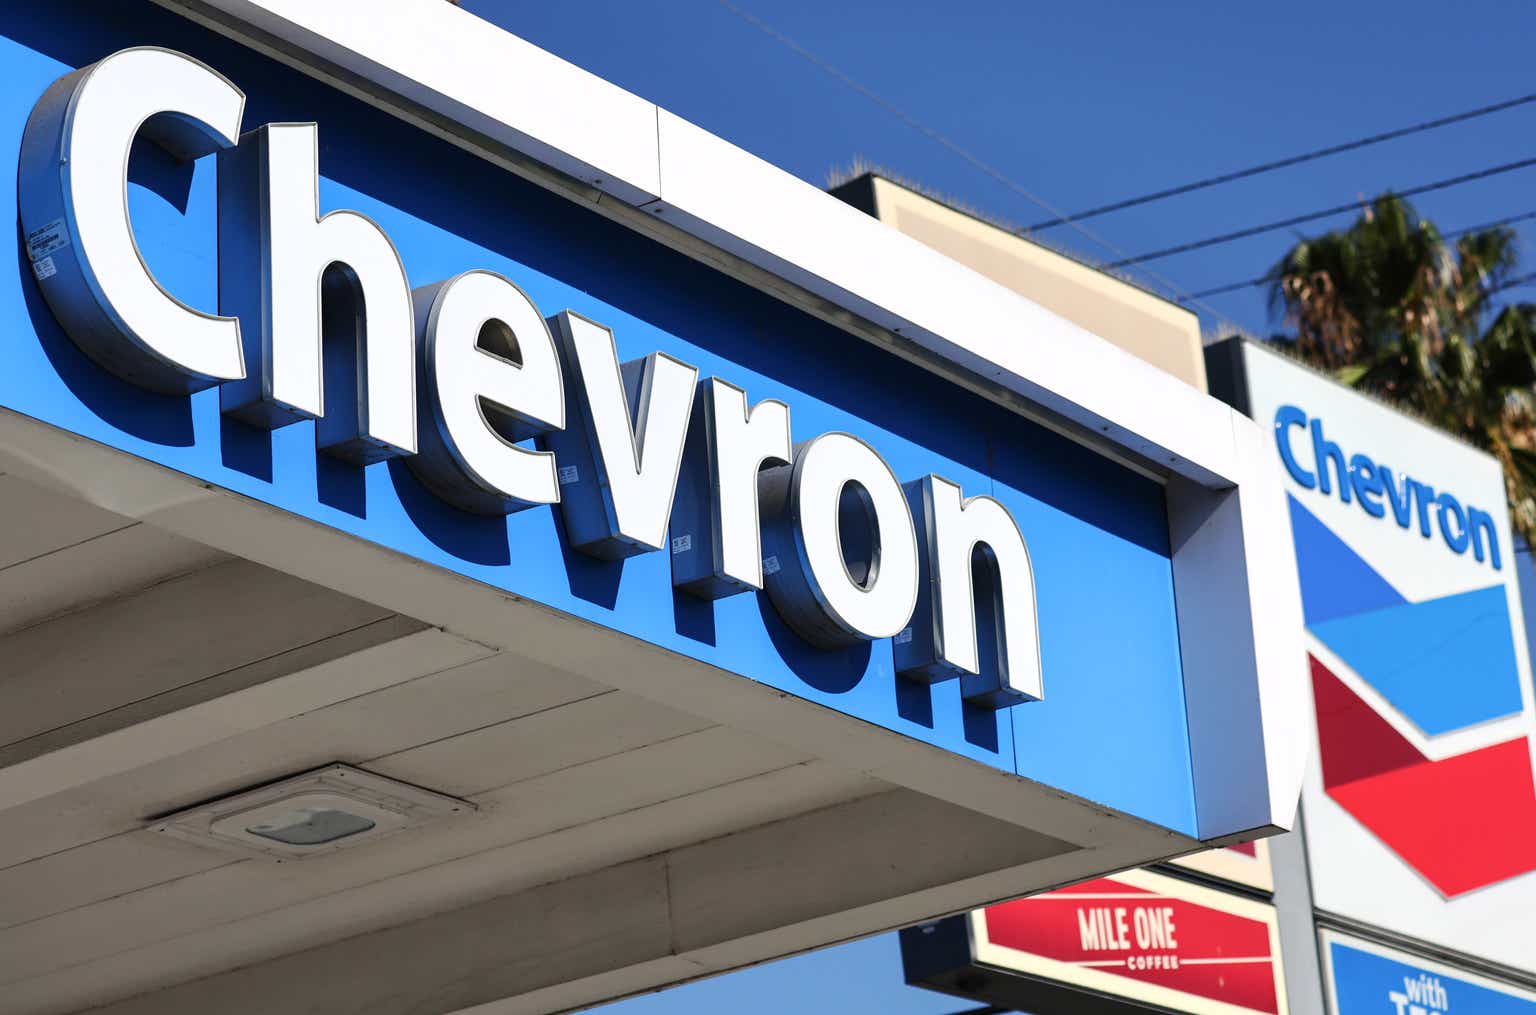 Chevron Indicates There Might Be A Reason To Invest (Rating Upgrade)